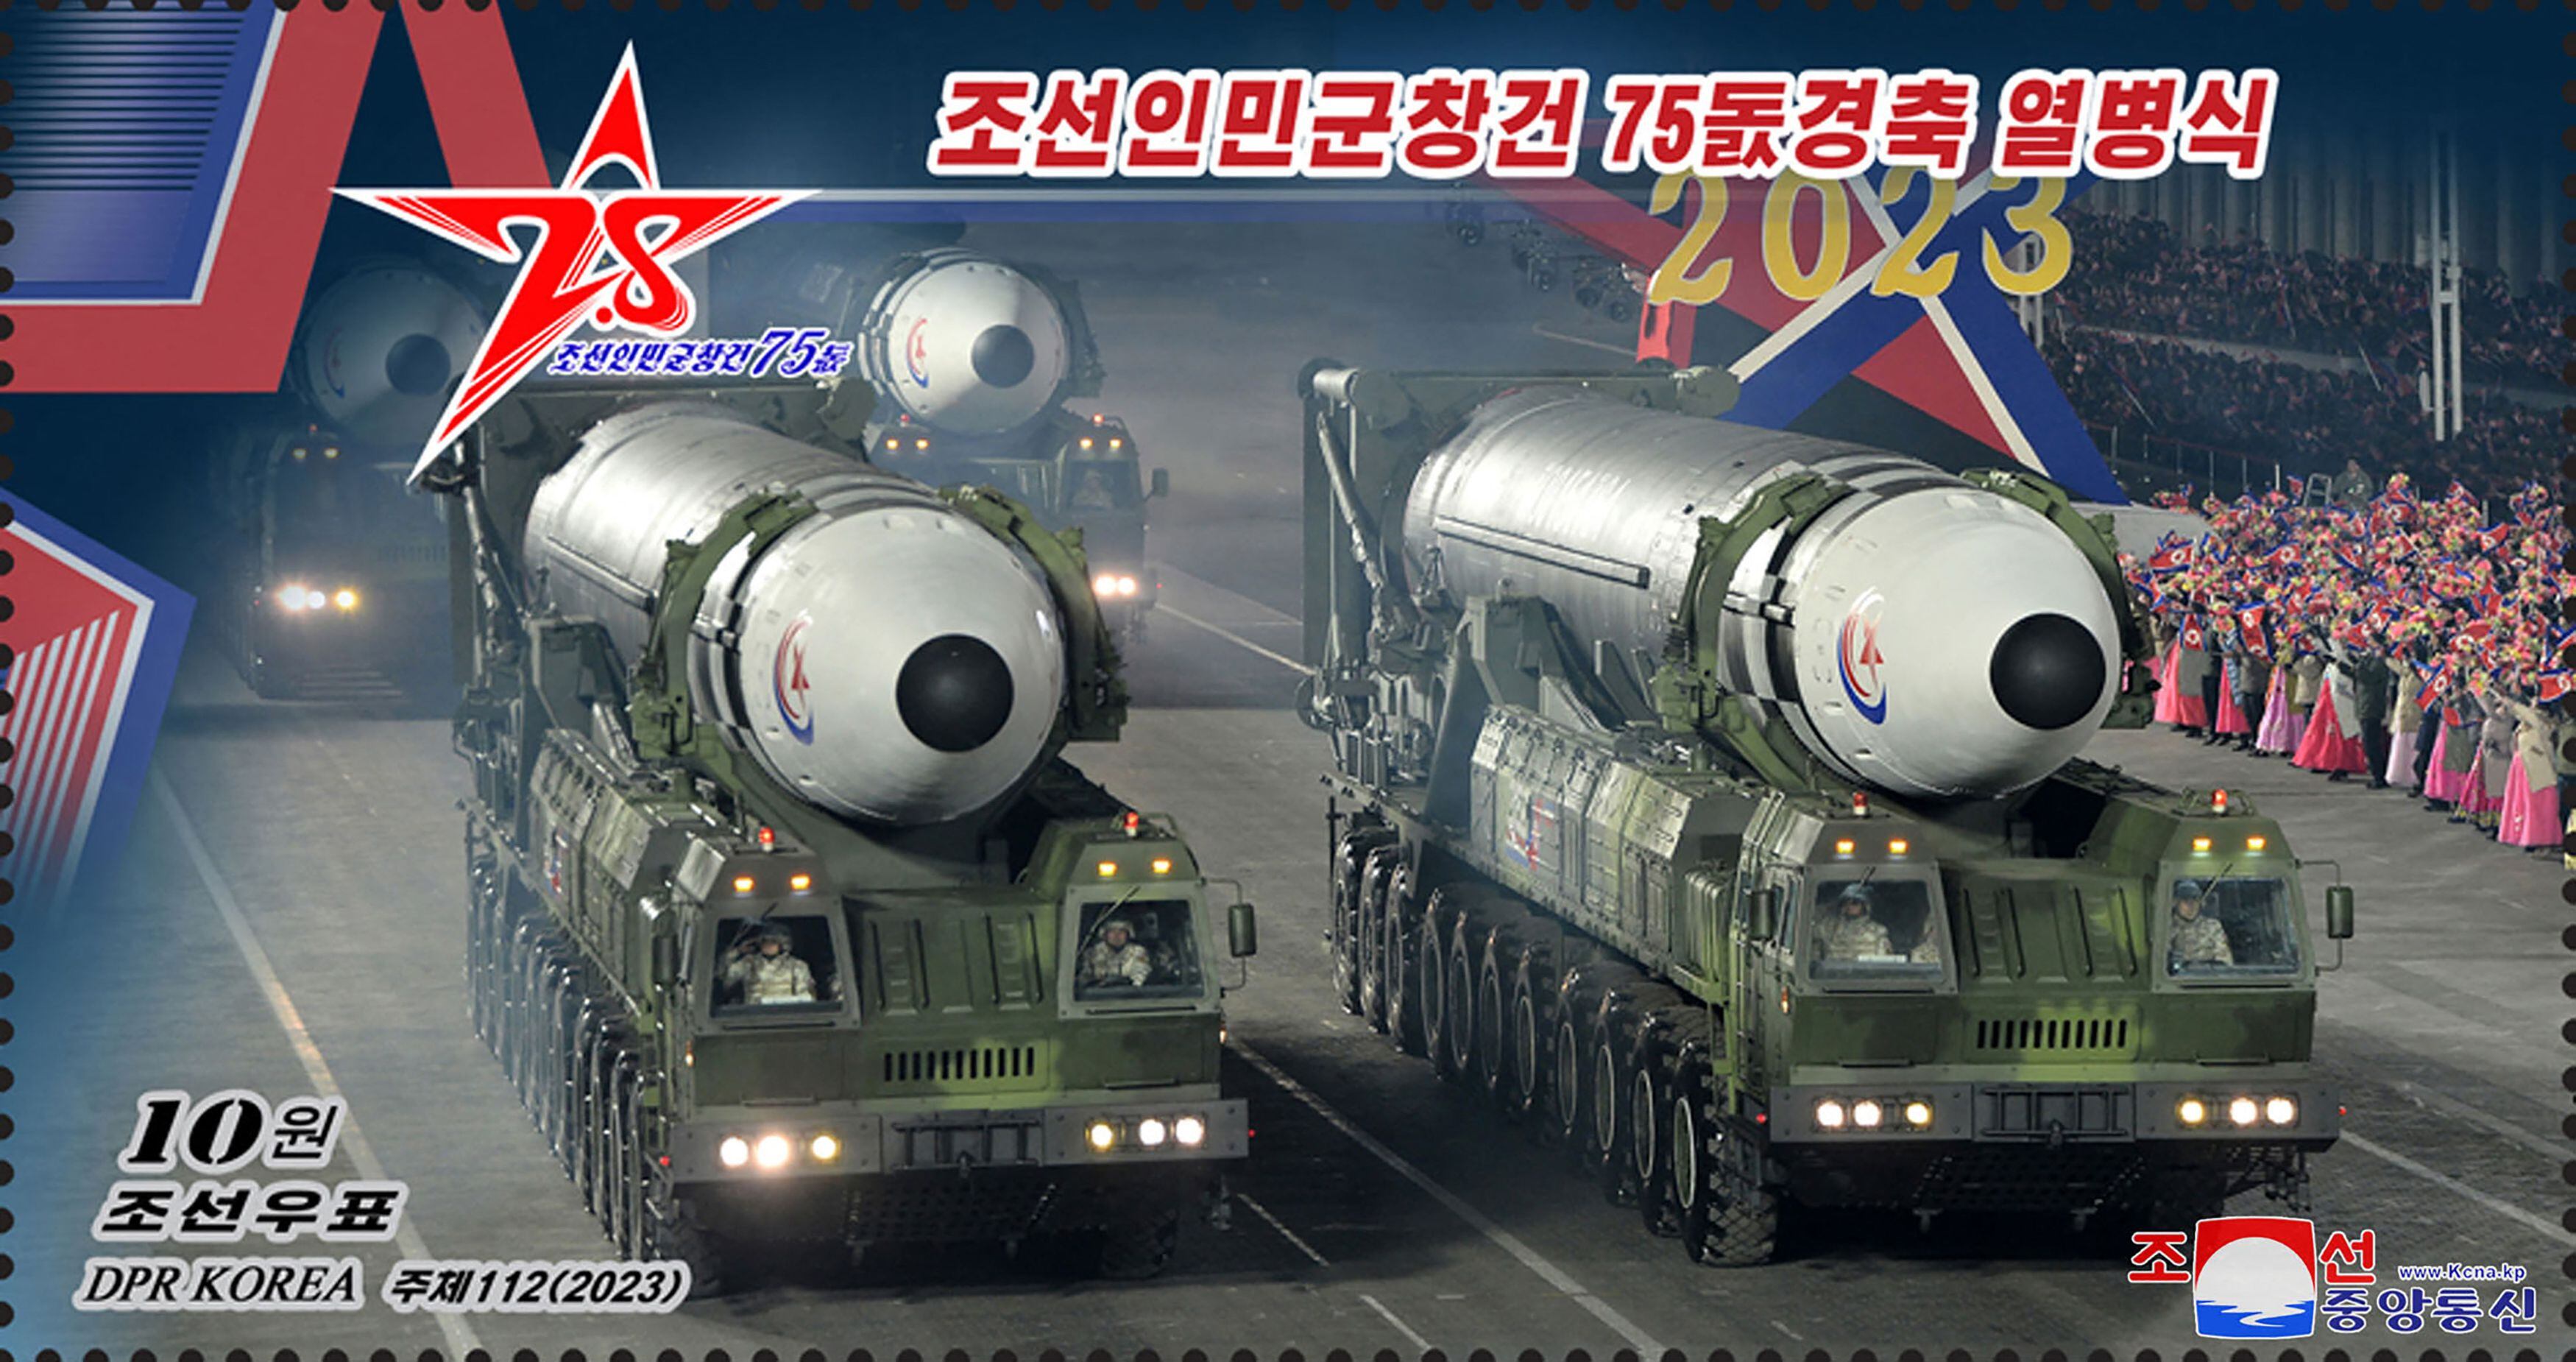 This image released by the Korean Central News Agency (KCNA) shows a postage stamp issued in North Korea with an illustration of the recent parade of intercontinental ballistic missiles (ICBMs) / AFP.